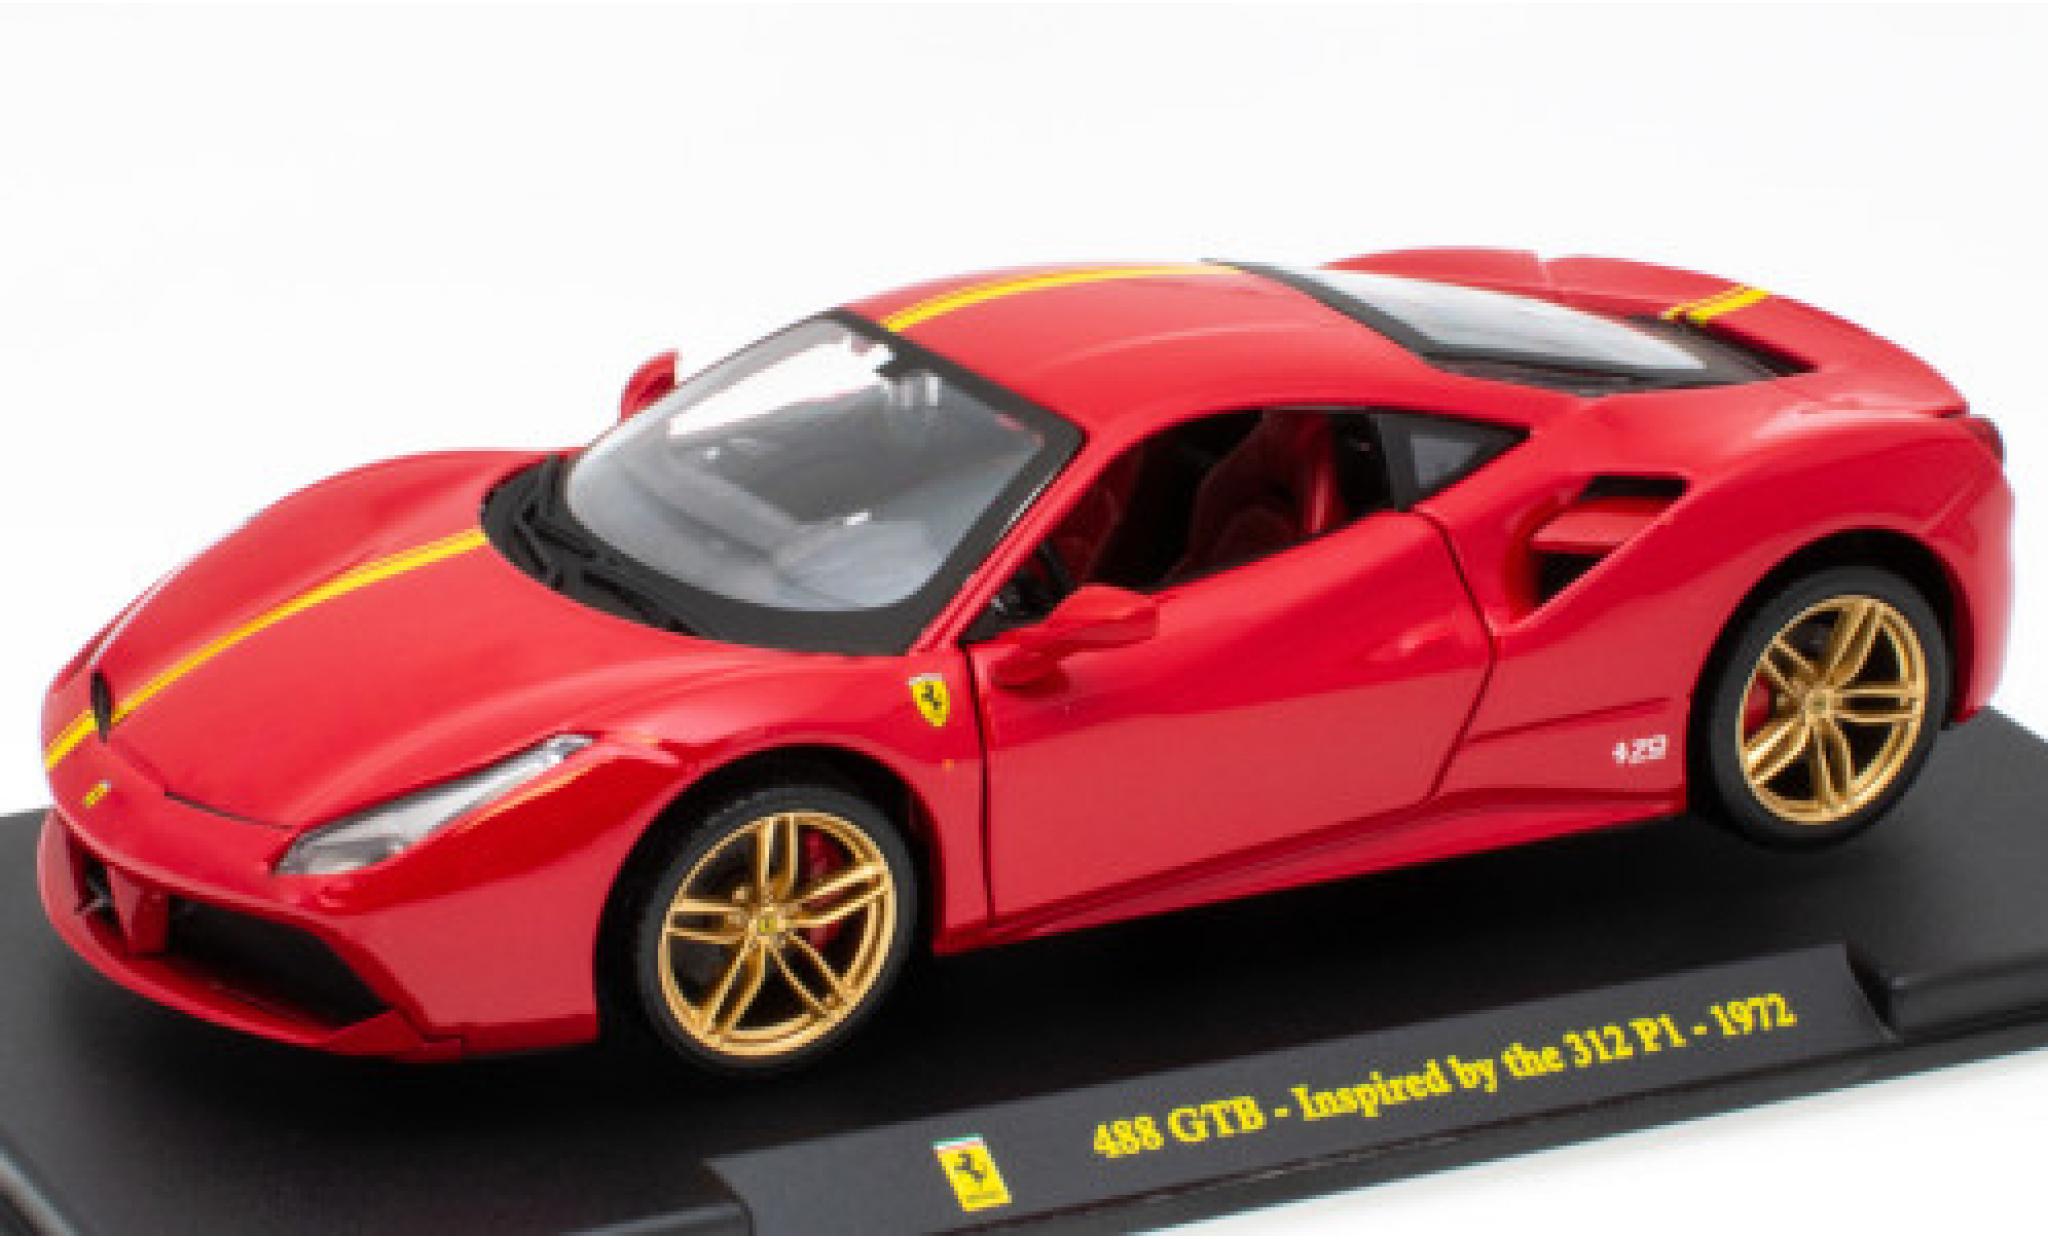 Ferrari 488 1/24 SpecialC 124 GTB red/yellow Inspired by the 312 P1 (1972)